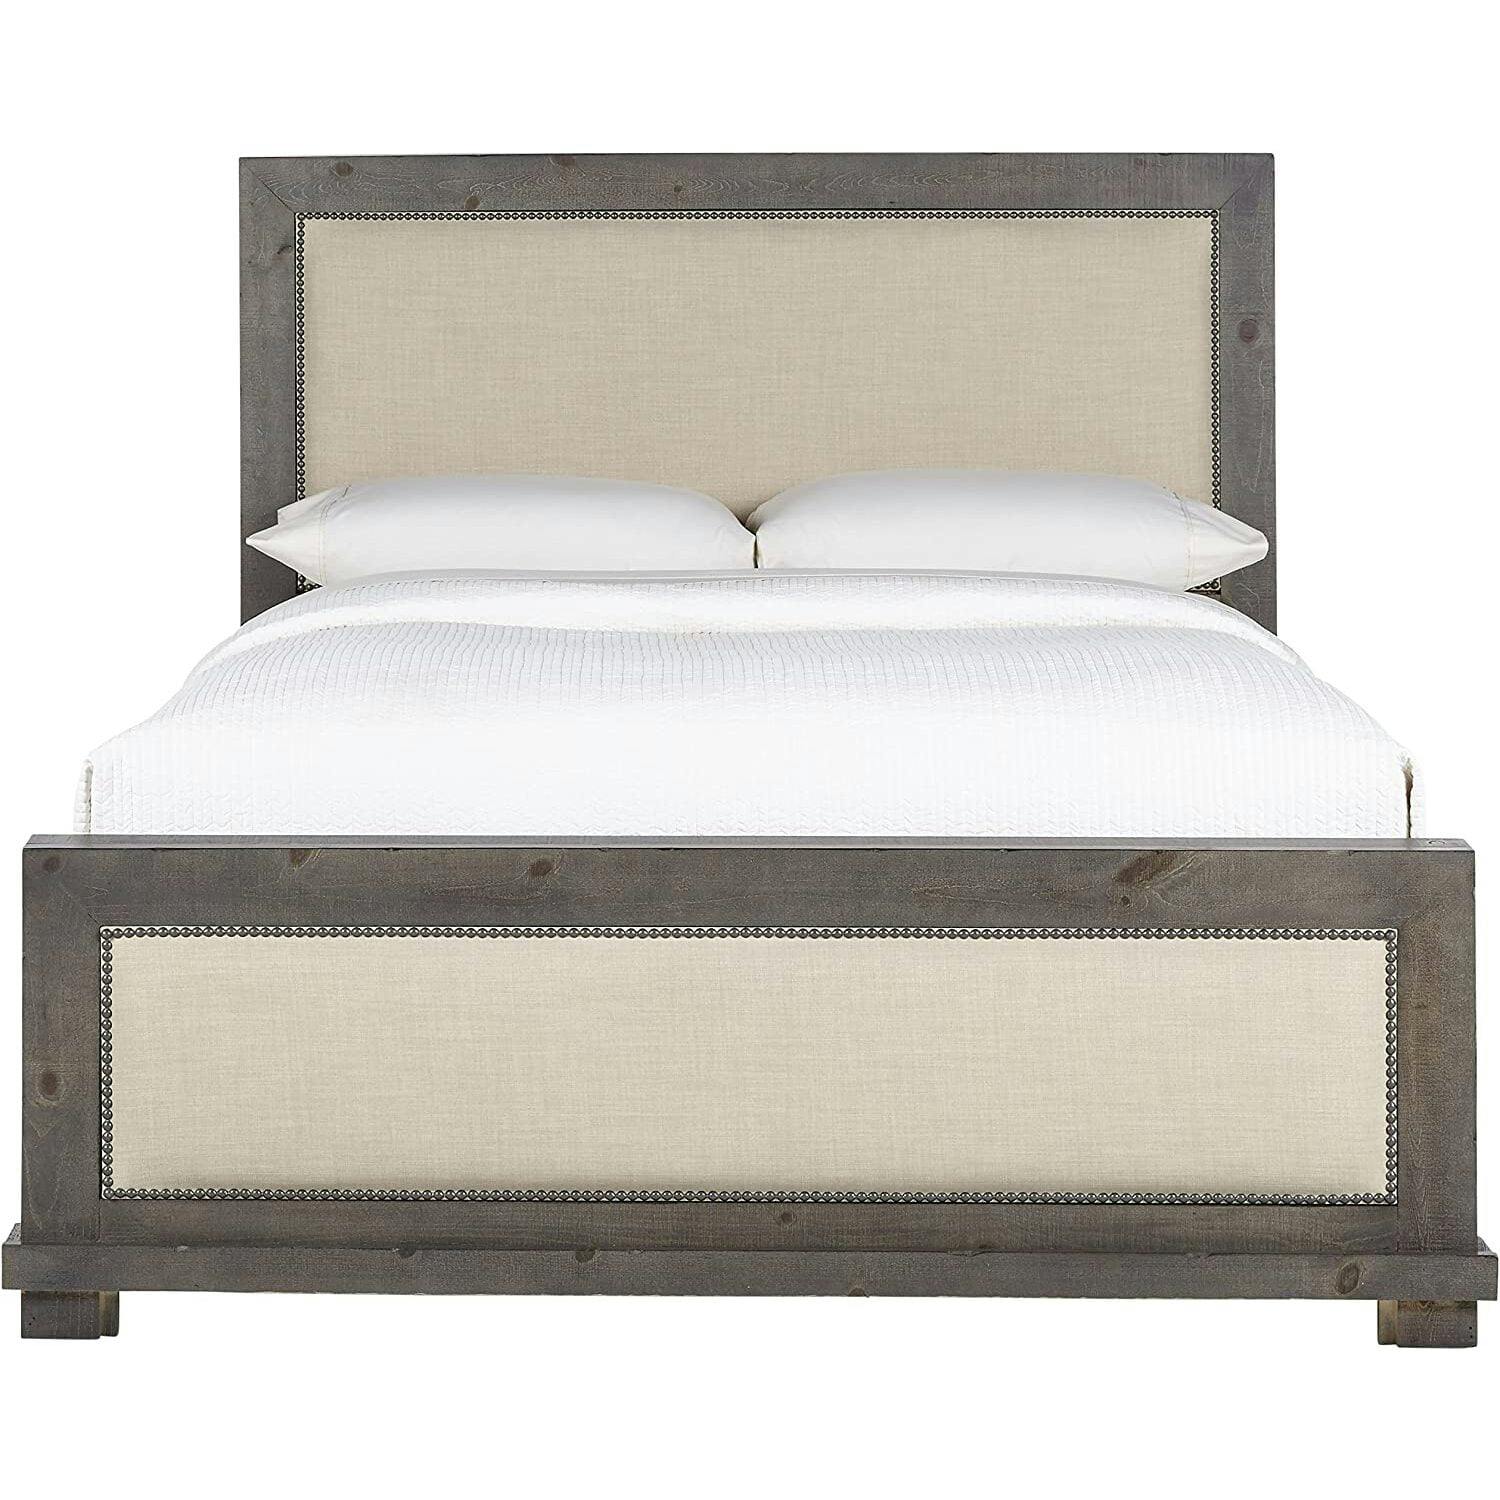 Transitional Beige & Gray Queen Upholstered Bed with Nailhead Trim